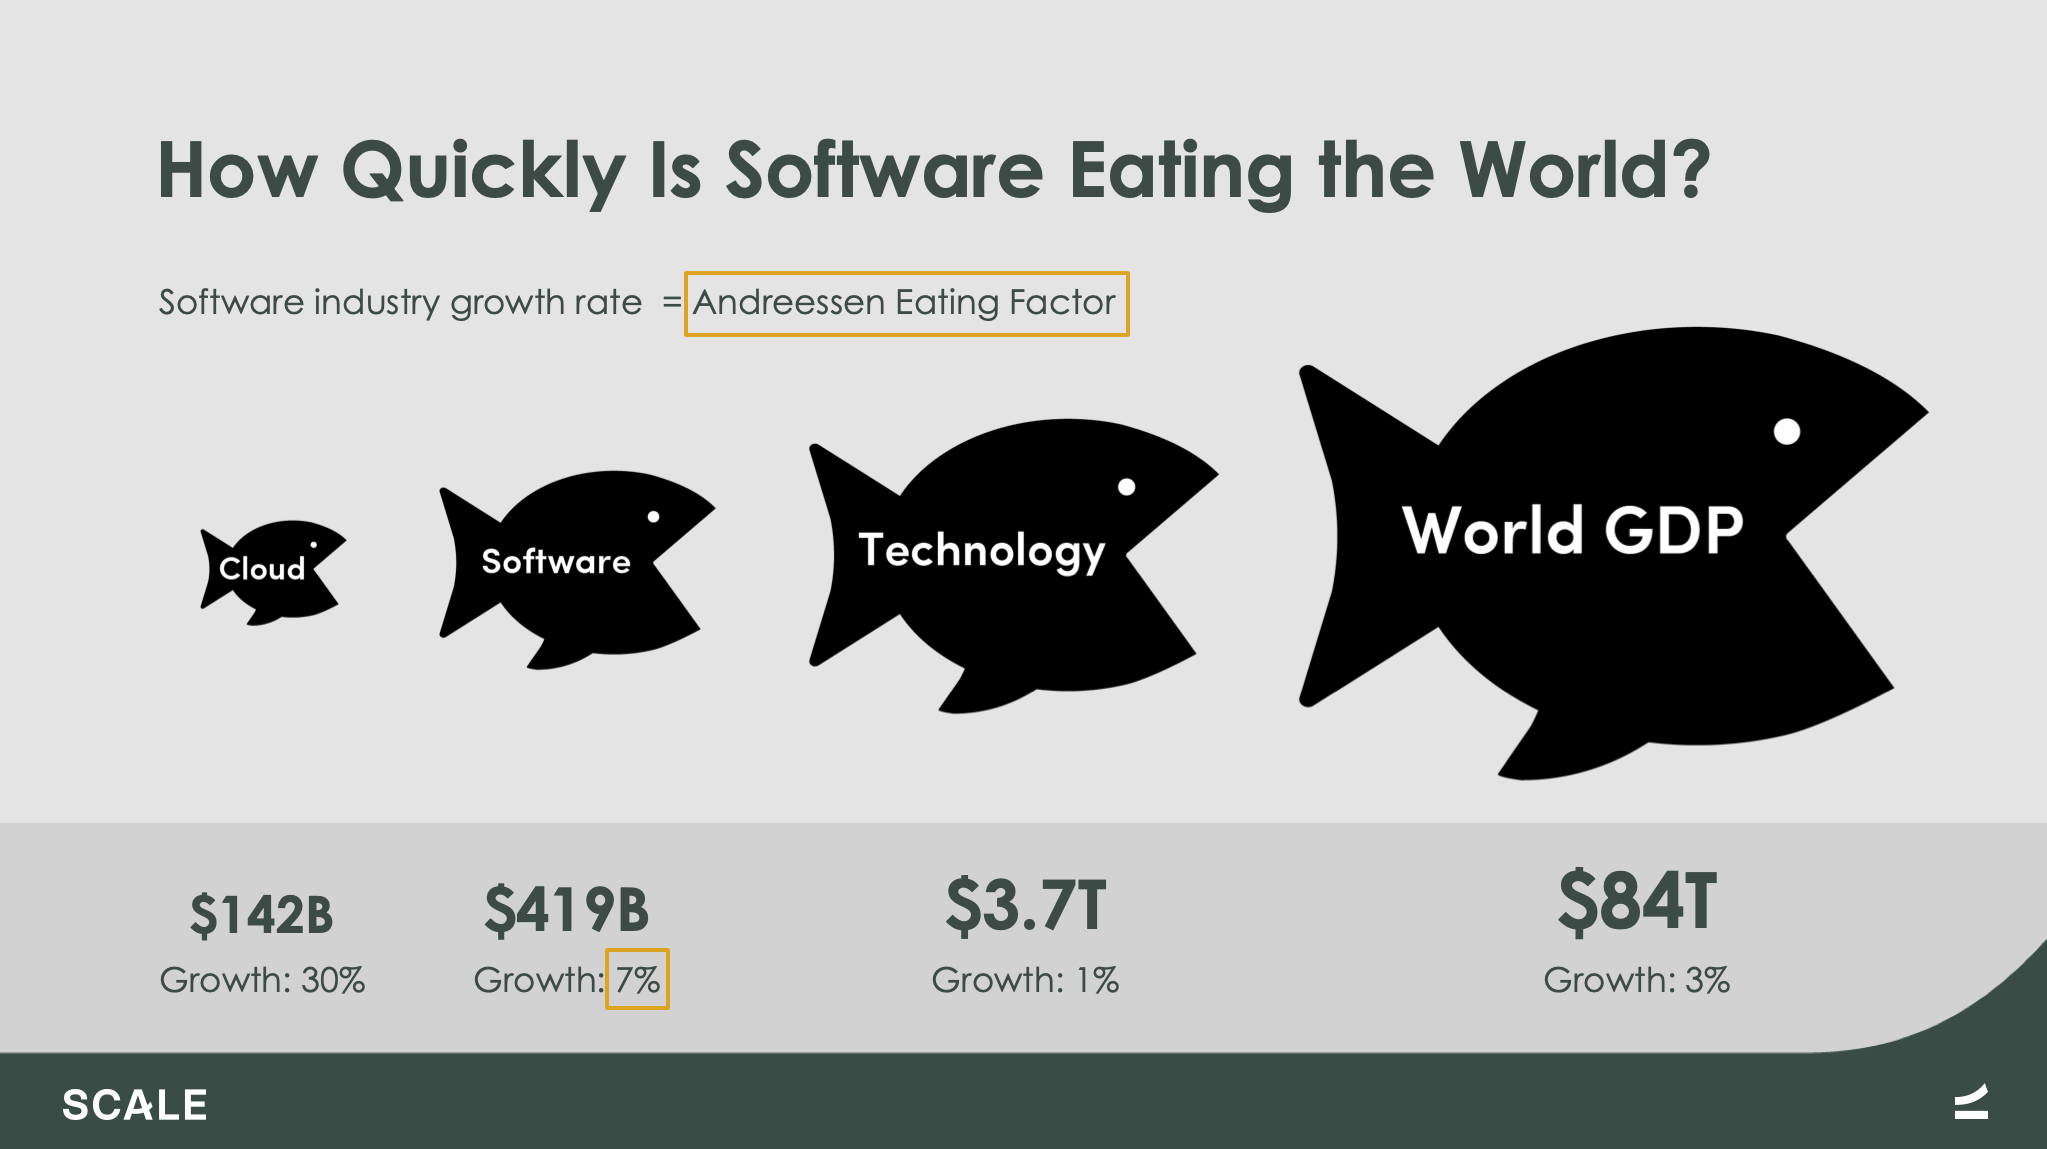 Investing in the Cloud Gold Rush to Hunger Games and Beyond | Scale Venture Partners | Andreessen Eating Factor 1